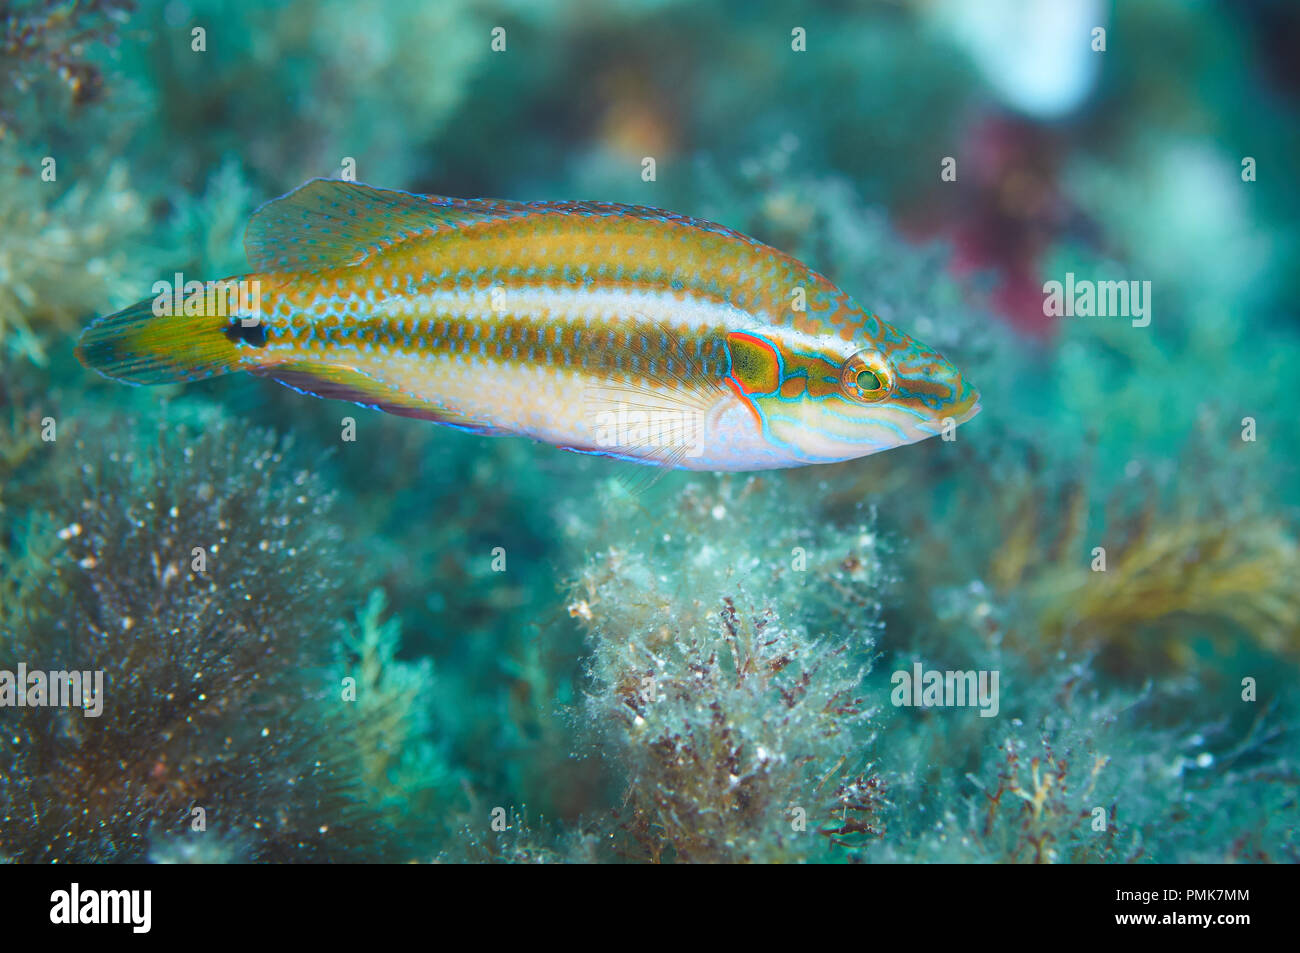 An ocellated wrasse (Symphodus ocellatus) male in nuptial livery in Mediterranean Sea (Ses Salines Natural Park, Formentera, Balearic Islands, Spain) Stock Photo